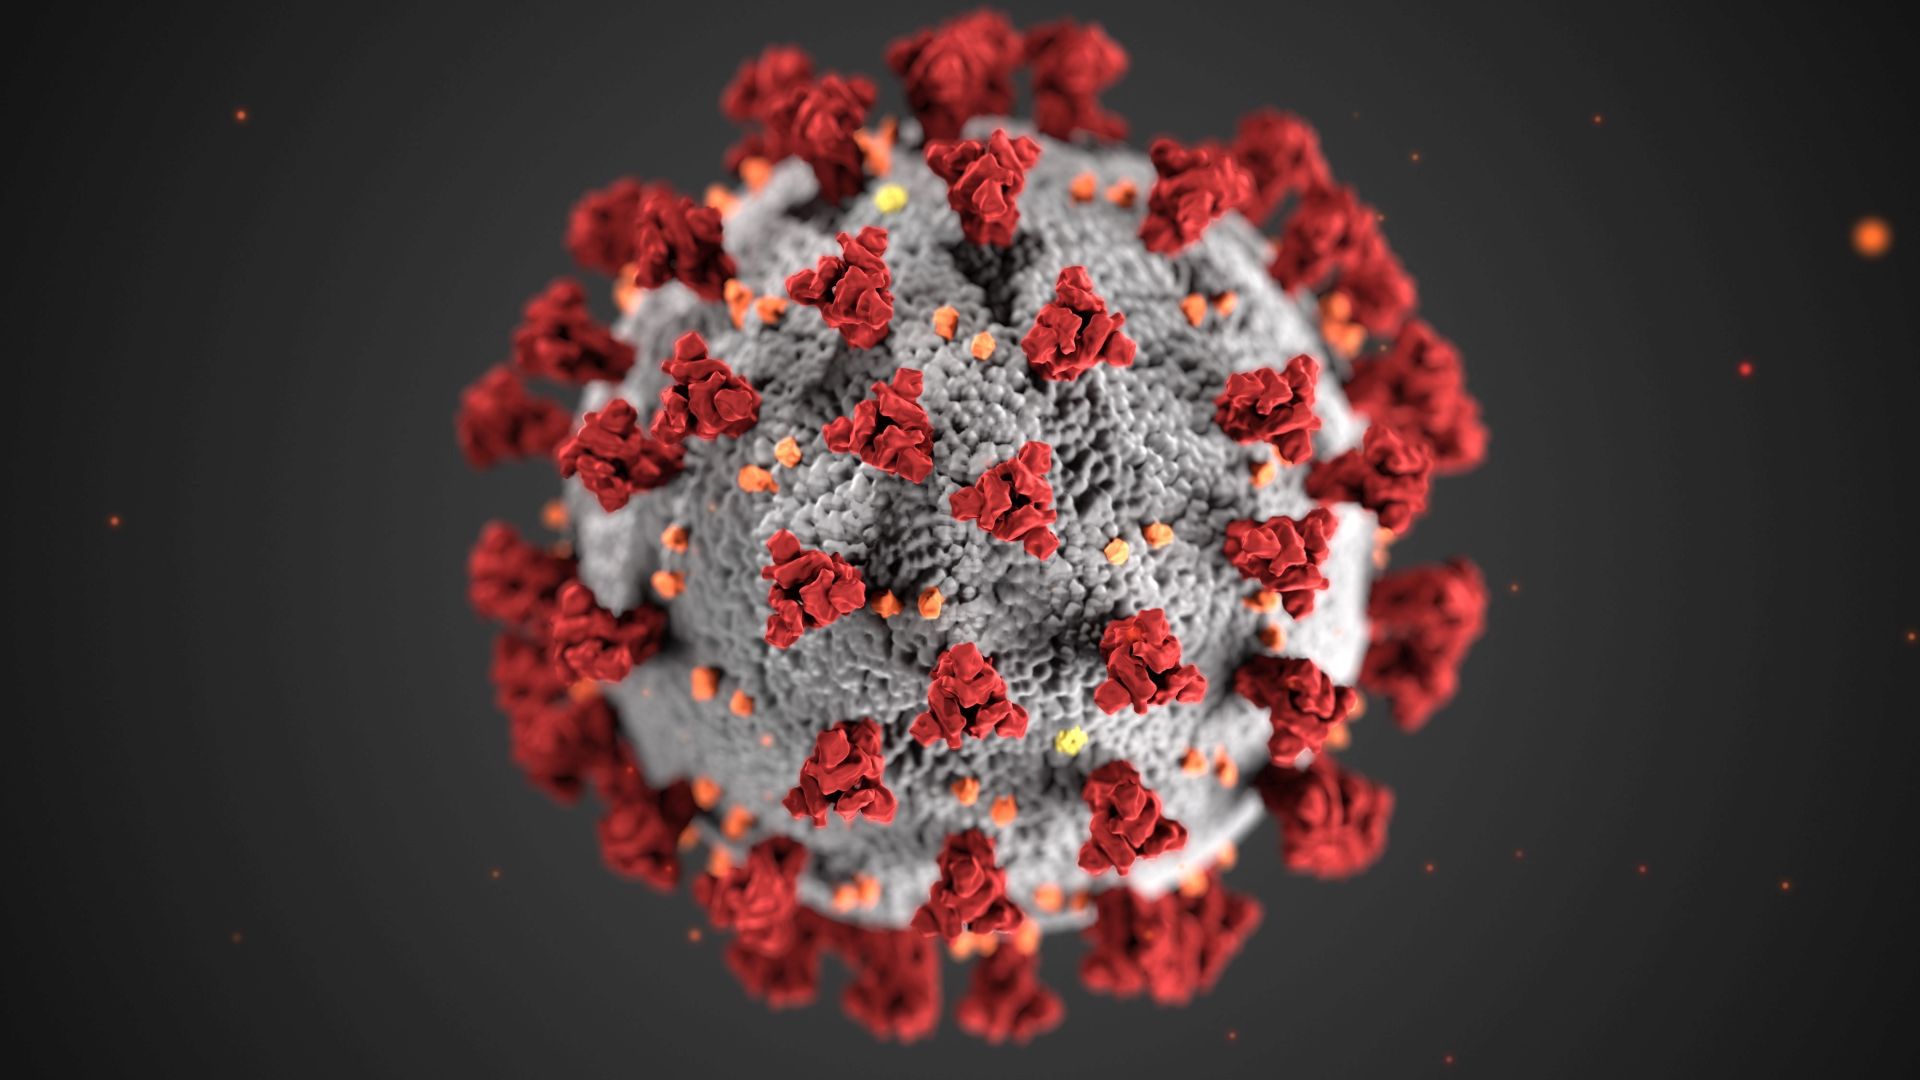 epa08295338 A handout illustration made available by the Centers for Disease Control and Prevention (CDC), shows 'ultrastructural morphology' of the coronaviruses, issued 15 March 2020. The novel coronavirus, named Severe Acute Respiratory Syndrome coronavirus 2 (SARS-CoV-2) was identified as the cause of an outbreak of respiratory illness first detected in Wuhan, China, in 2019. The illness caused by this virus has been named coronavirus disease 2019 (COVID-19).  EPA/CDC HANDOUT  HANDOUT EDITORIAL USE ONLY/NO SALES